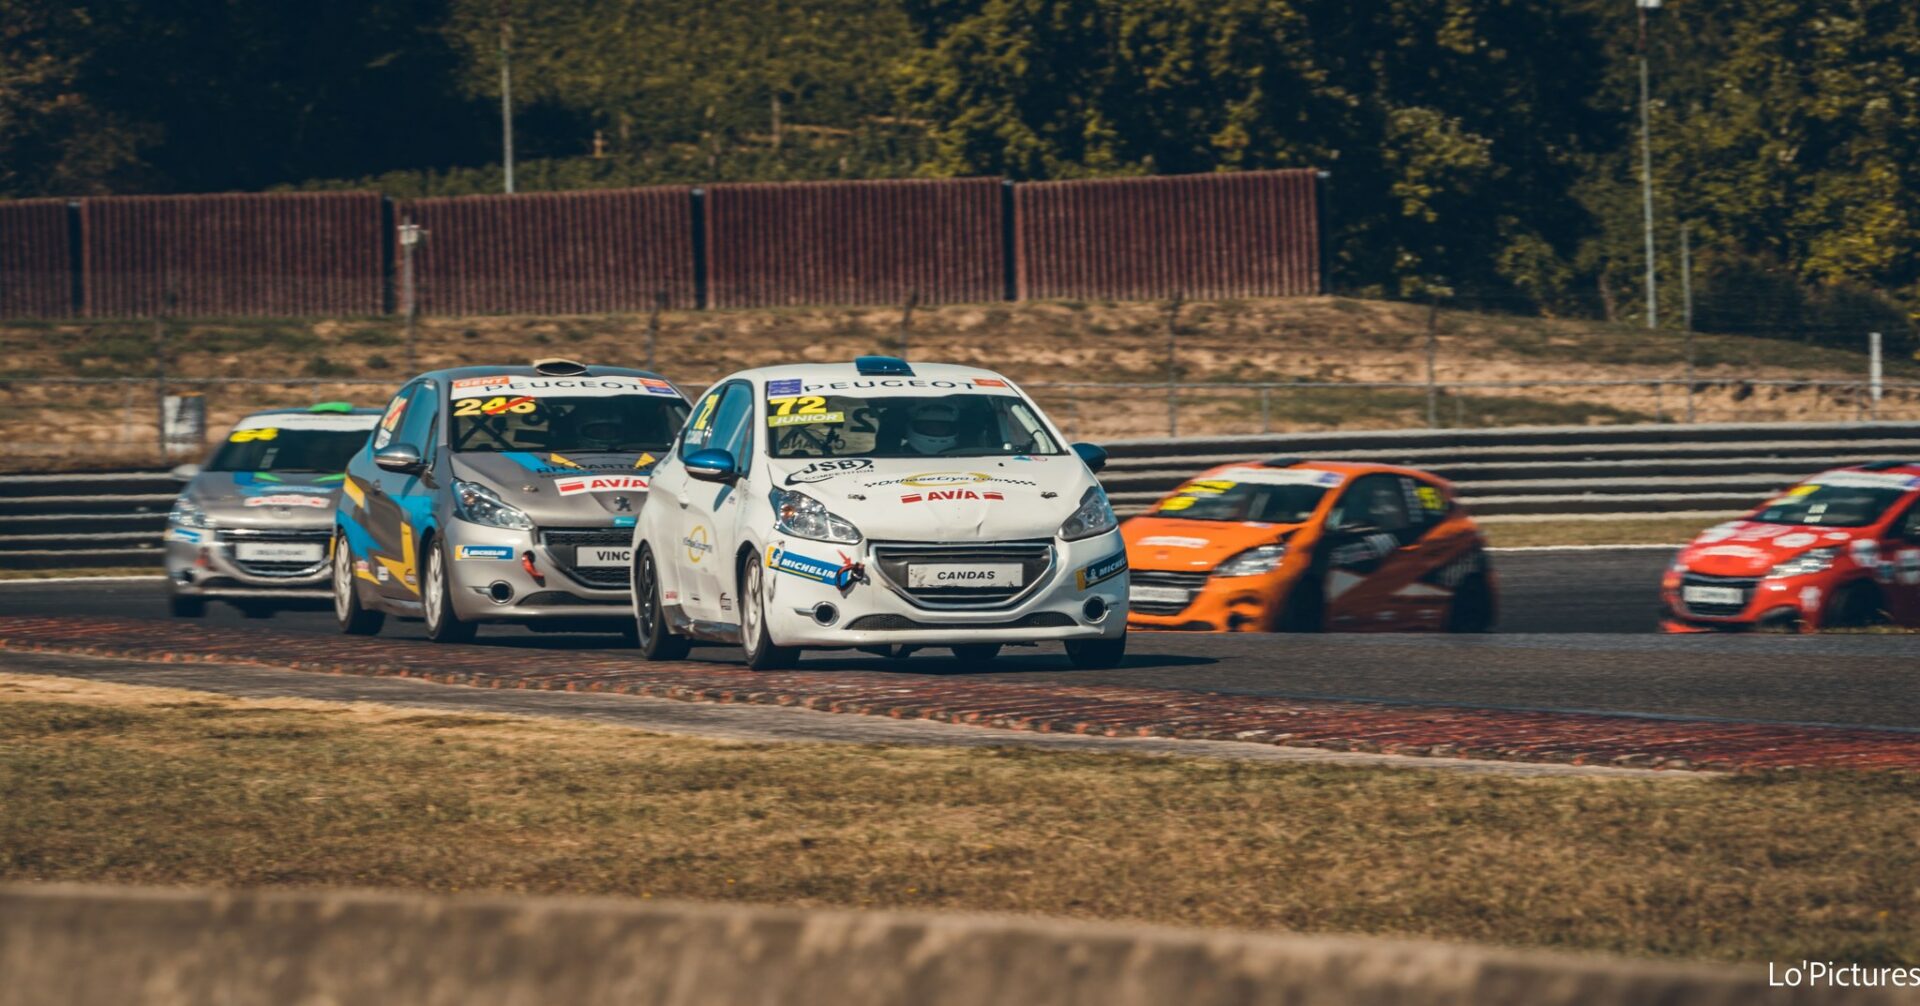 Ultimate Cup Series, Circuit de Nevers Magny-Cours